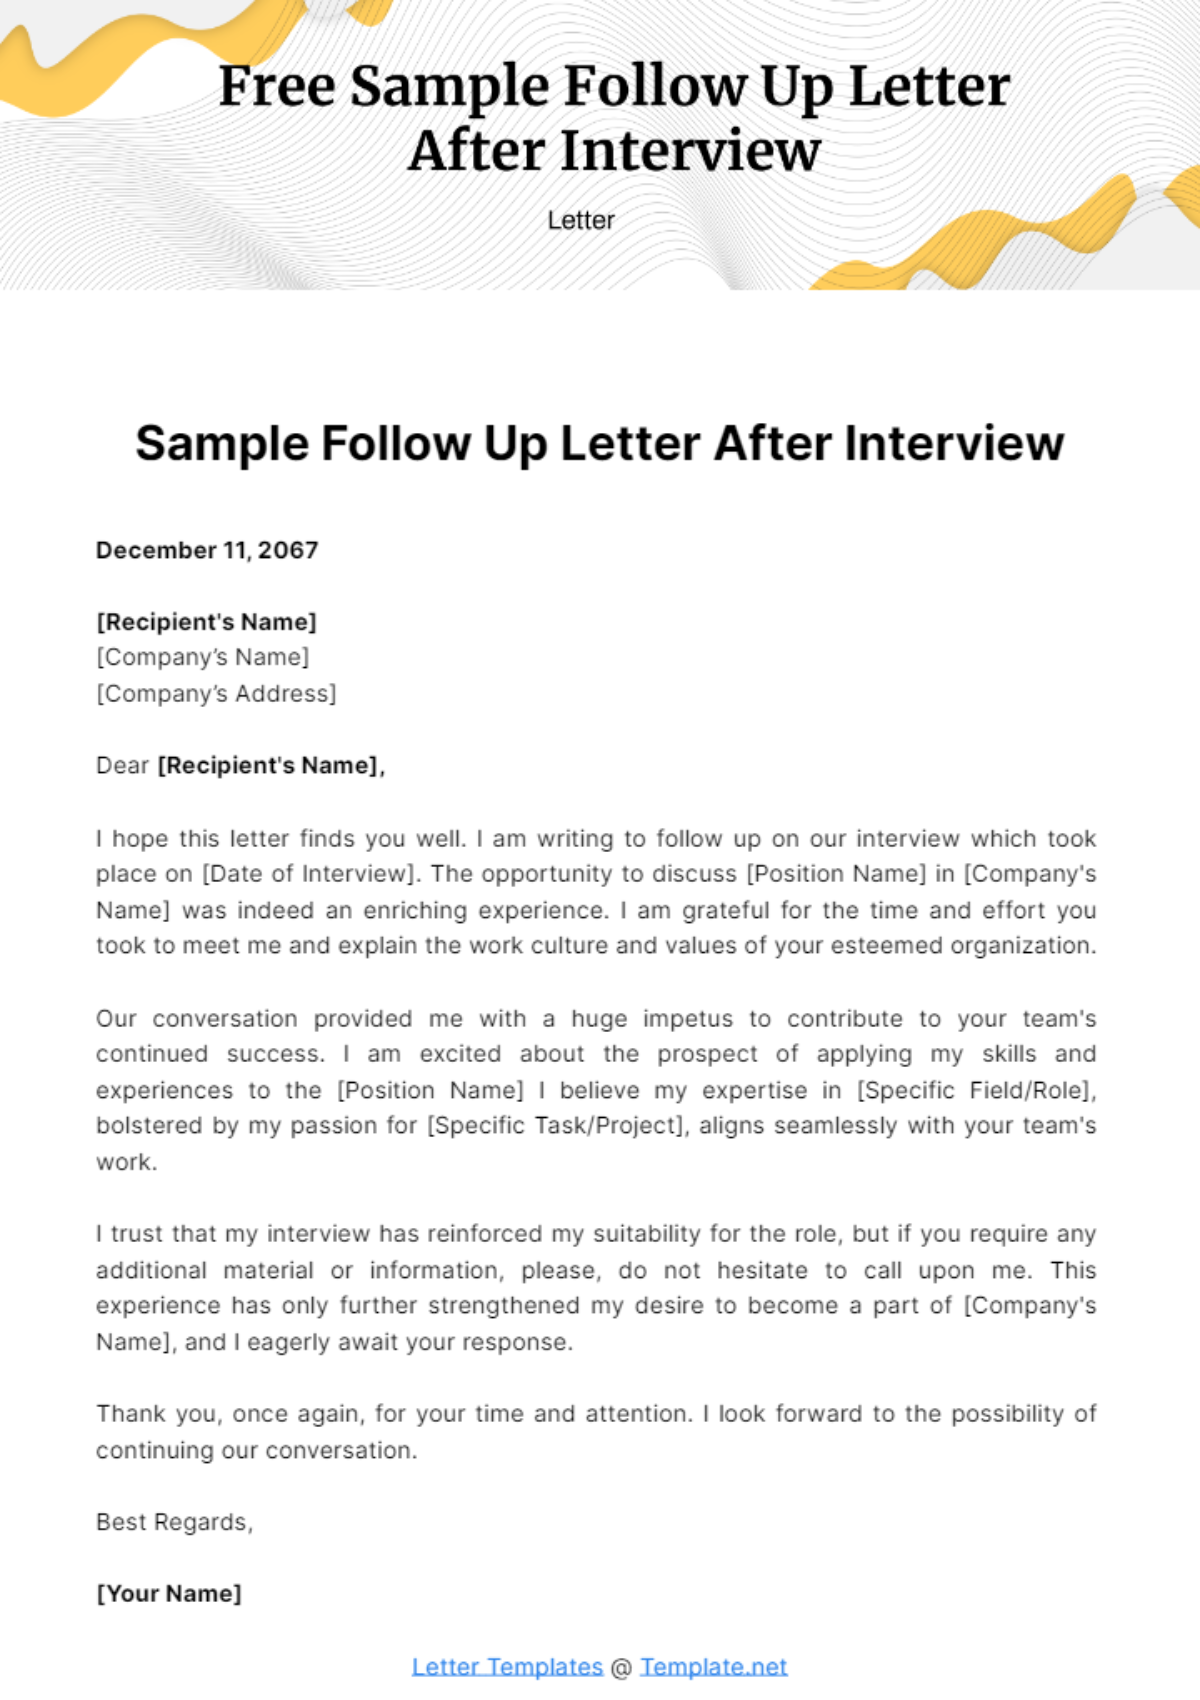 Free Sample Follow Up Letter After Interview Template